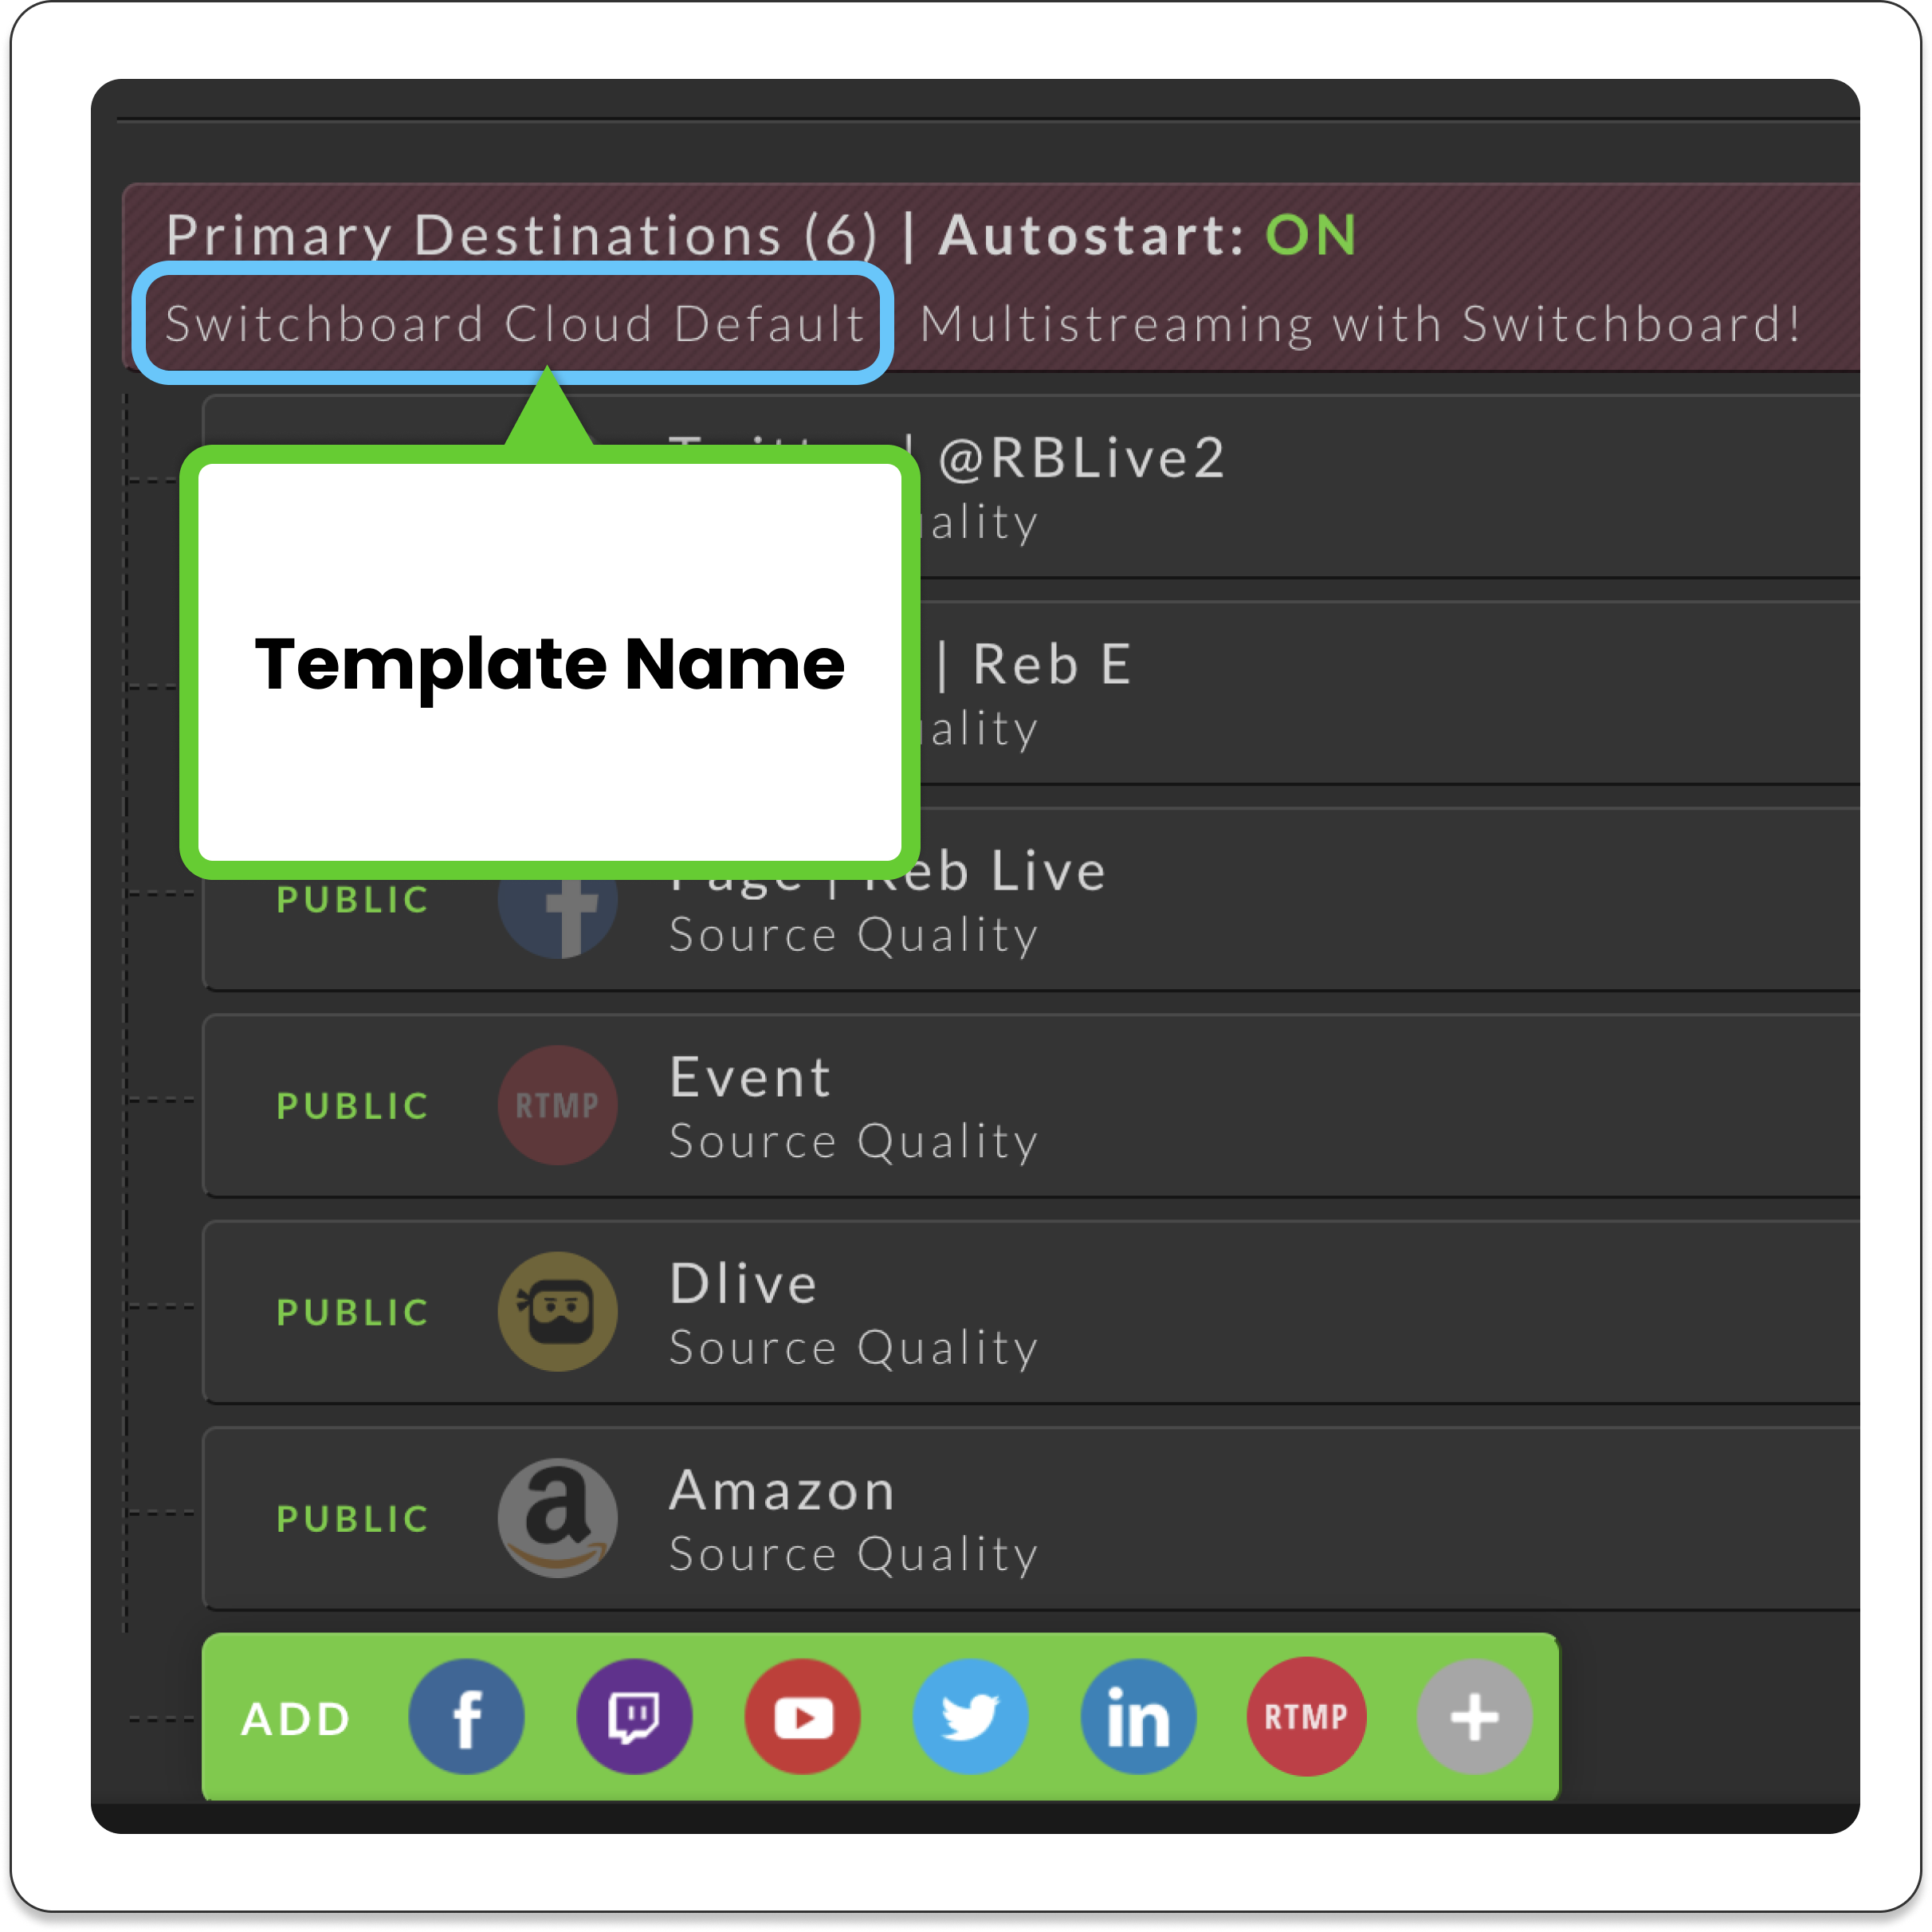 switchboardlive_workflow-page_destinations_pane_template_name.png